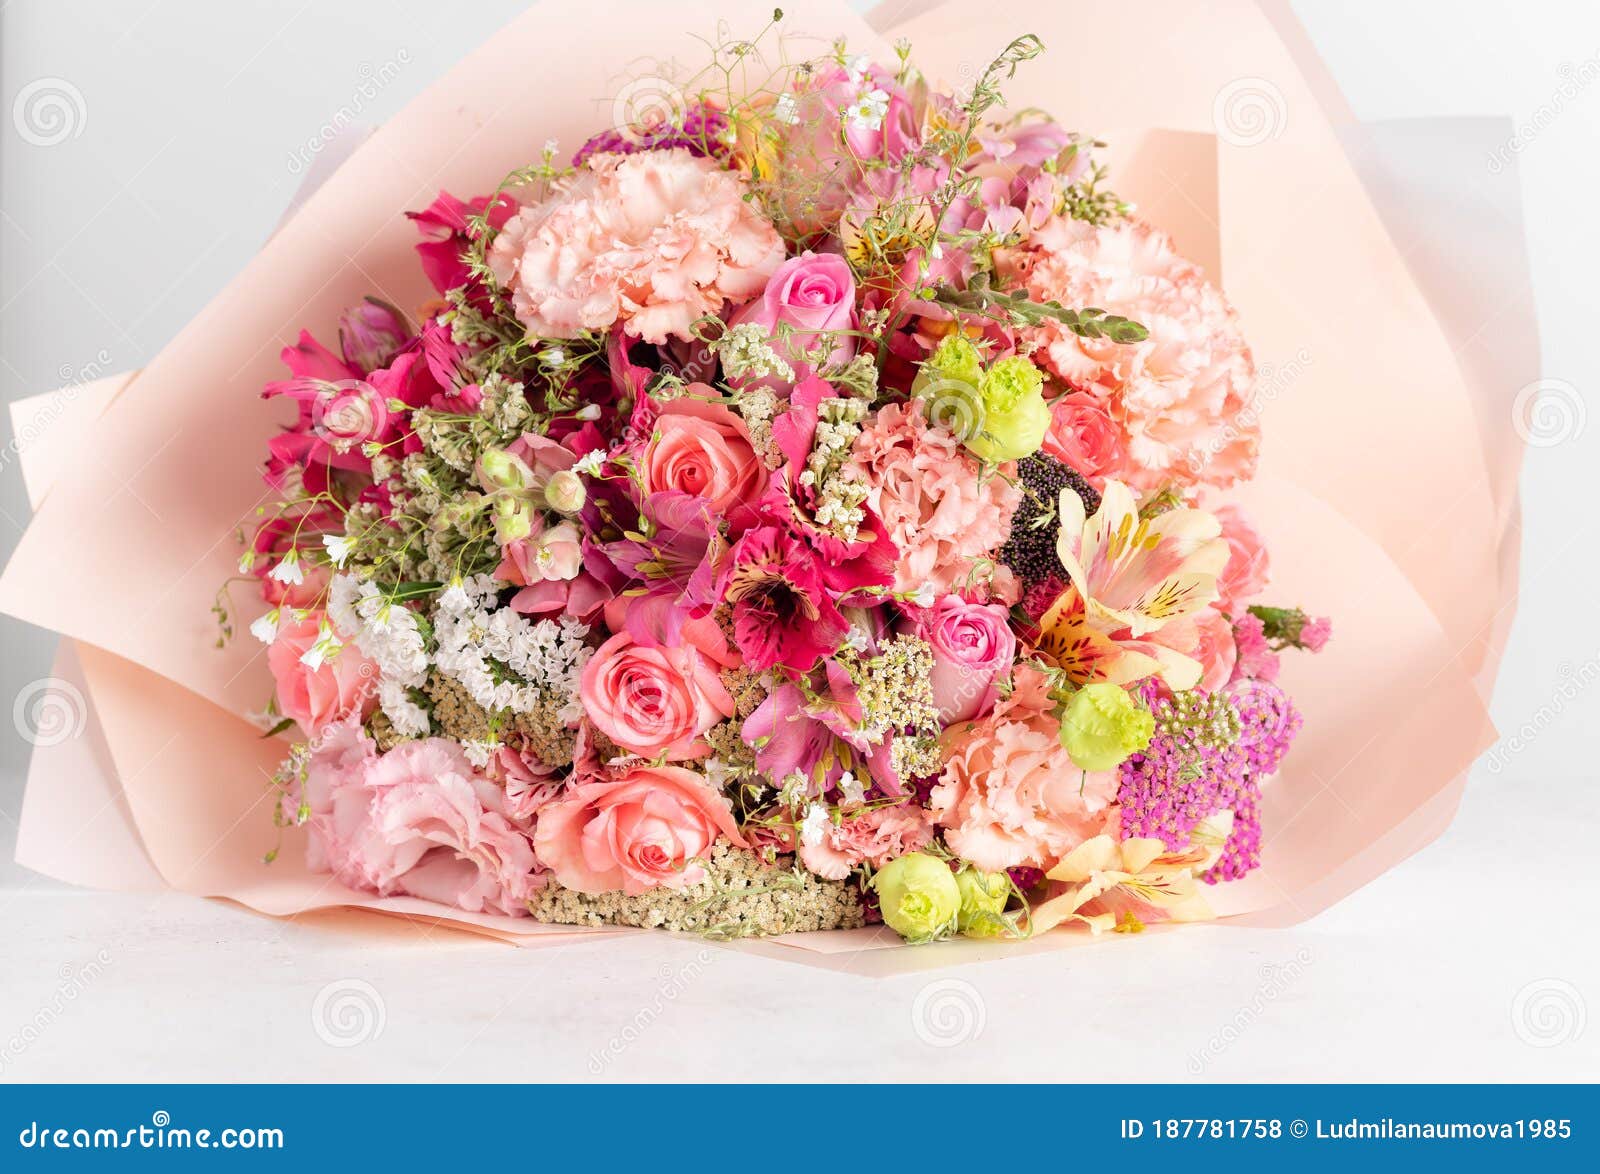 Different Types of Flowers are Collected by the Florist in a ...